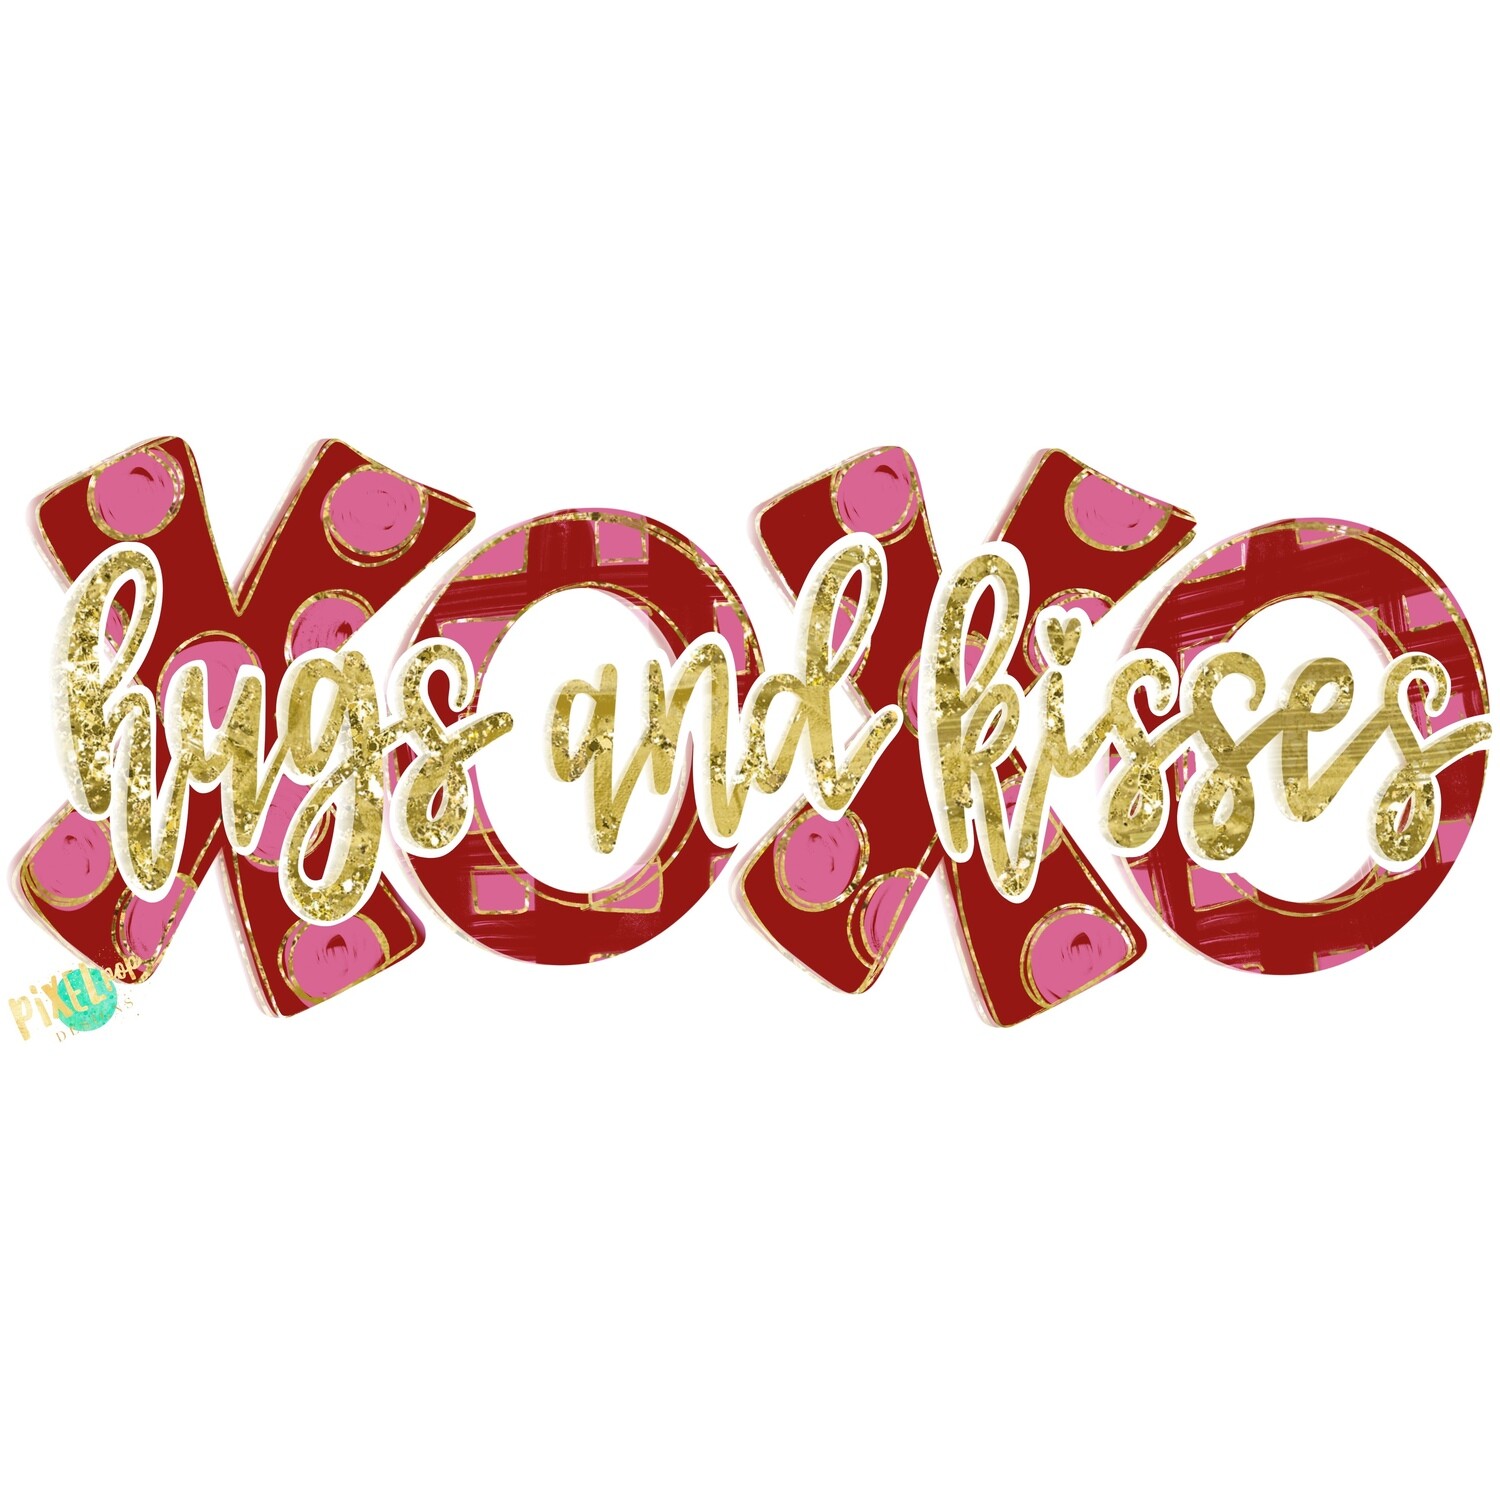 Hugs and Kisses XoXo Gold Script Sublimation PNG | Valentine Day Art | Hand Painted Art | Digital Download | Printable Art | Clip Art